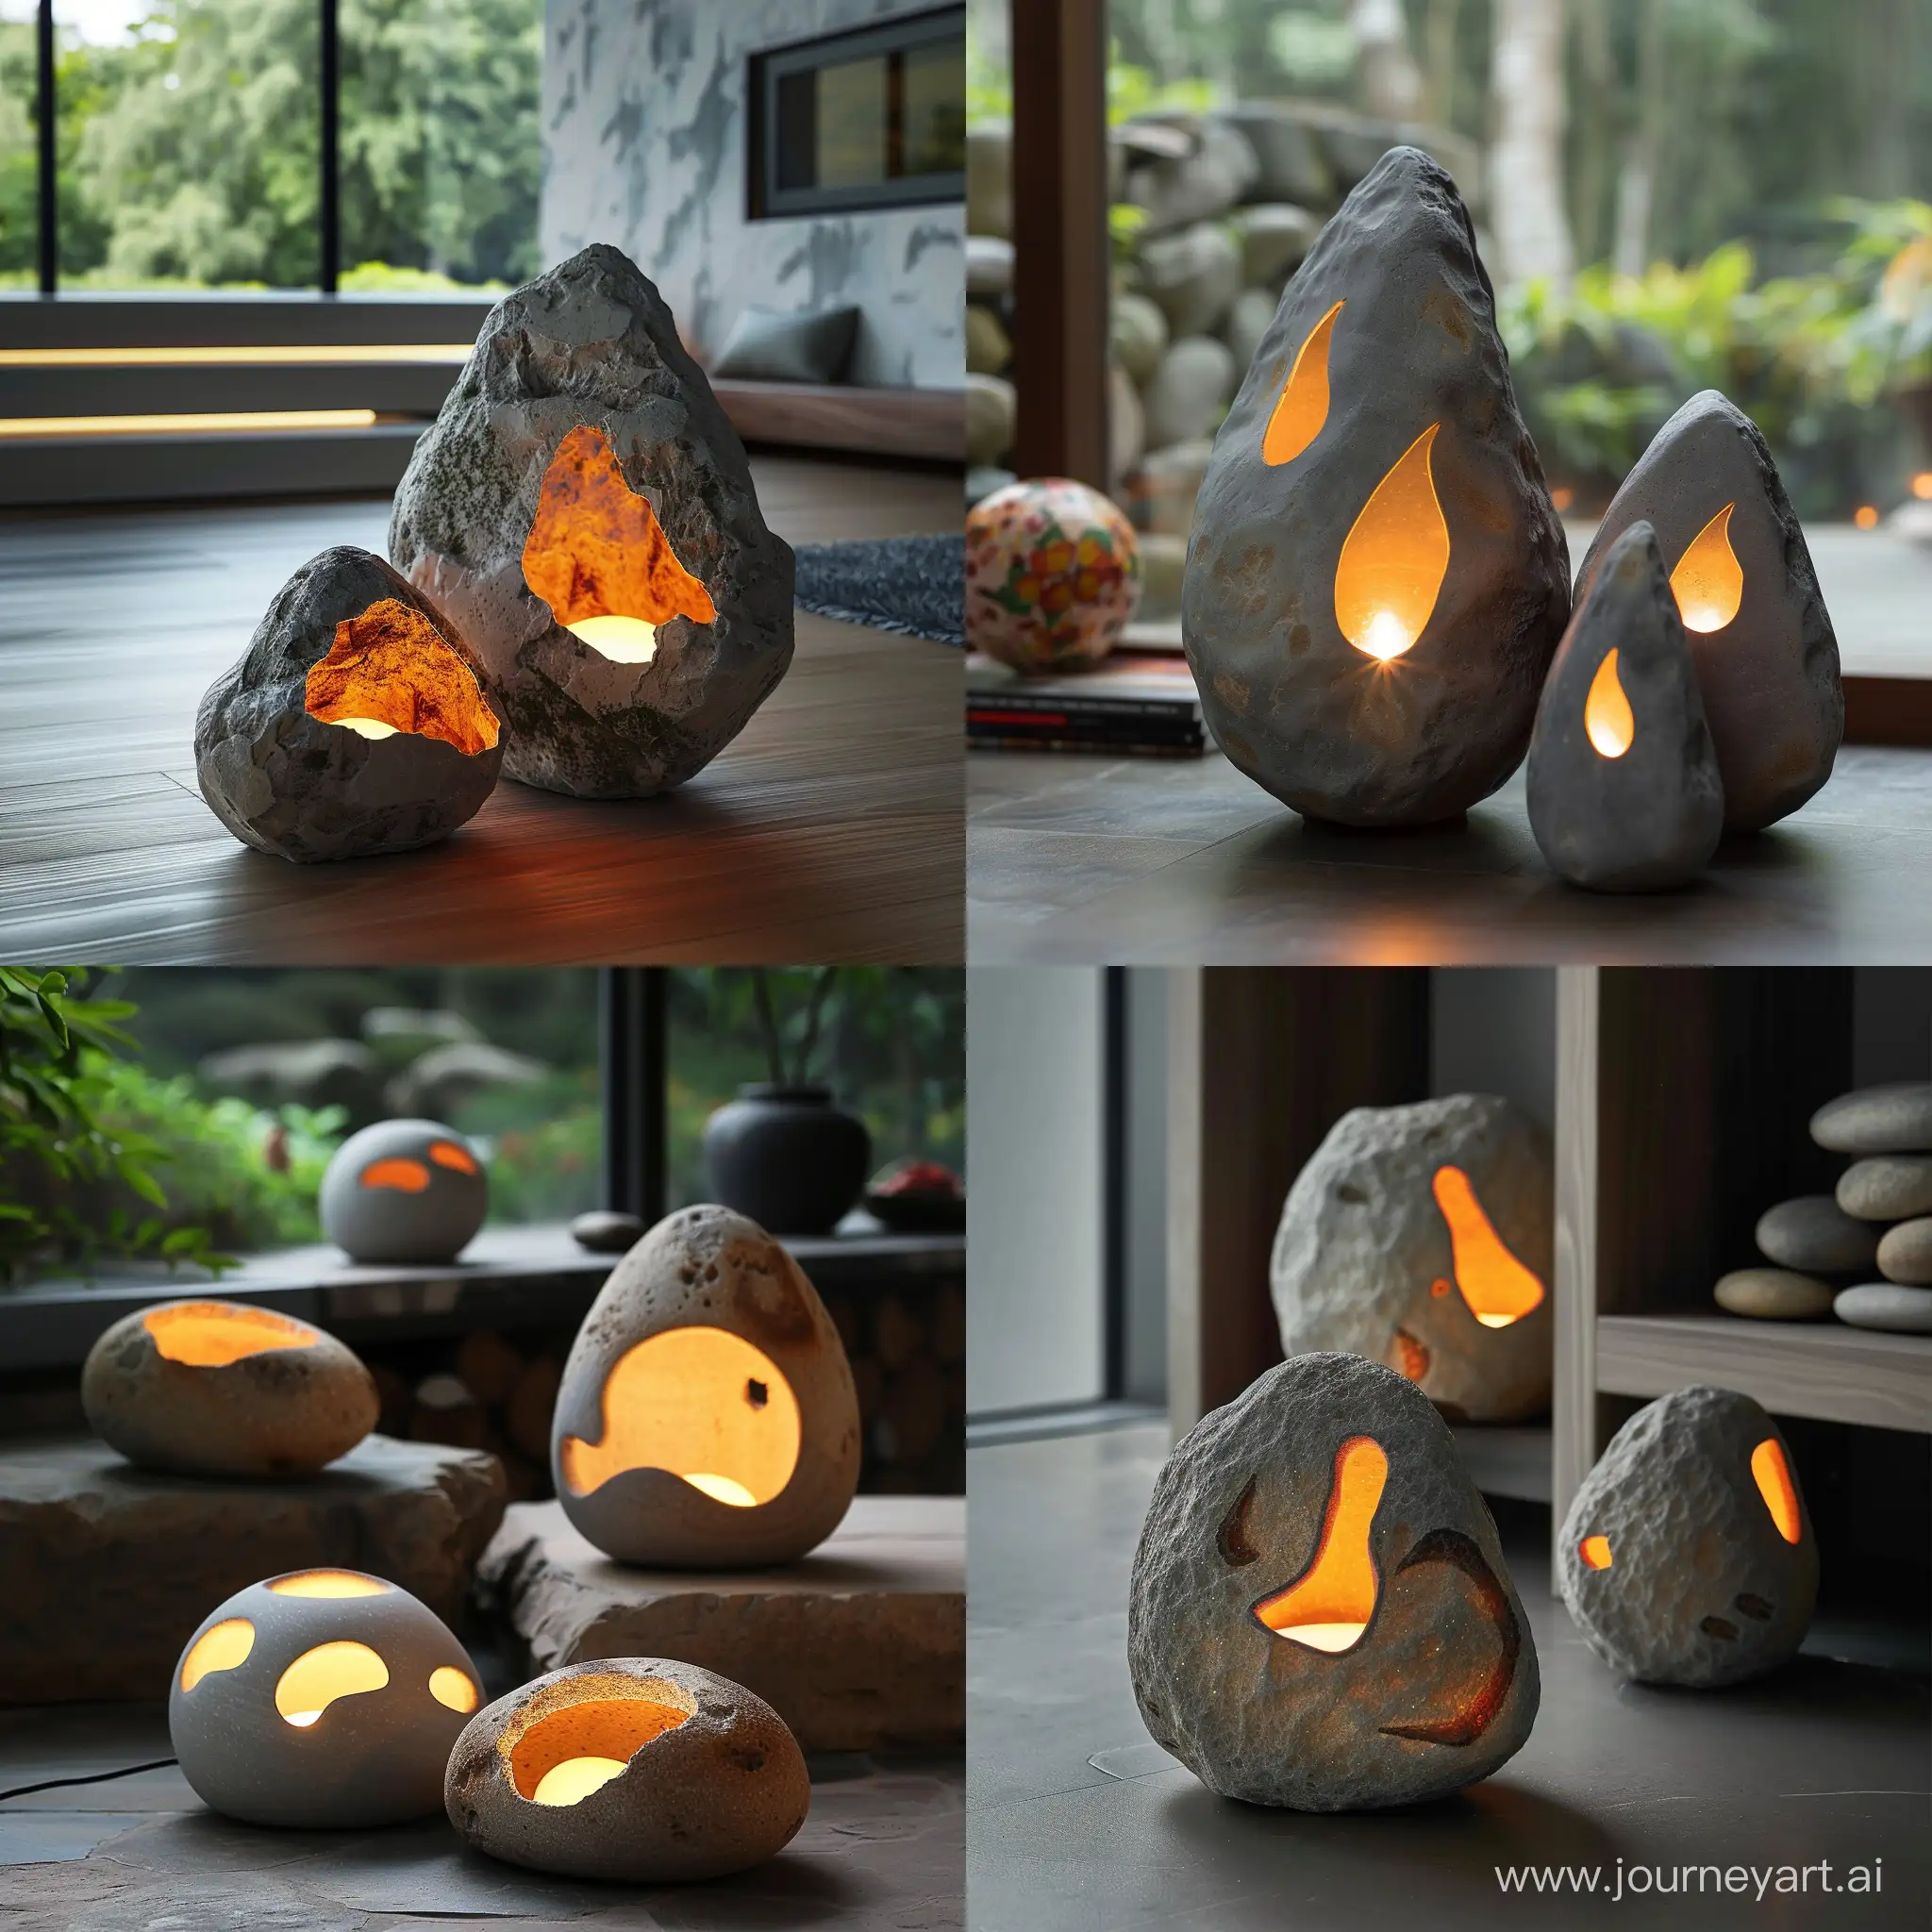 imagine :1. Create a series of Living Pebbles in different sizes to cater to various lighting needs around the home, such as bedside tables, shelves, or outdoor spaces.
2. Introduce a smart feature that allows the Living Pebble to sync with home energy management systems, providing real-time feedback on energy usage and promoting sustainable living.
3. Offer a limited edition range featuring hand-painted designs by local artists, adding a unique and artistic touch to the pebble's natural aesthetic.
4. Develop a companion app that allows users to customize the light intensity and color of the Living Pebble, providing a personalized lighting experience for different moods and occasions.
5. Collaborate with environmental organizations to donate a percentage of sales from each Living Pebble towards reforestation projects, further reinforcing the product's commitment to sustainability.
6. Explore the option of creating a larger version of the Living Pebble to serve as a decorative centerpiece, incorporating multiple cutouts for a mesmerizing lighting effect.
7. Consider offering a subscription service for biodegradable light diffuser refills, encouraging customers to maintain their Living Pebble in an eco-friendly manner.realistic style